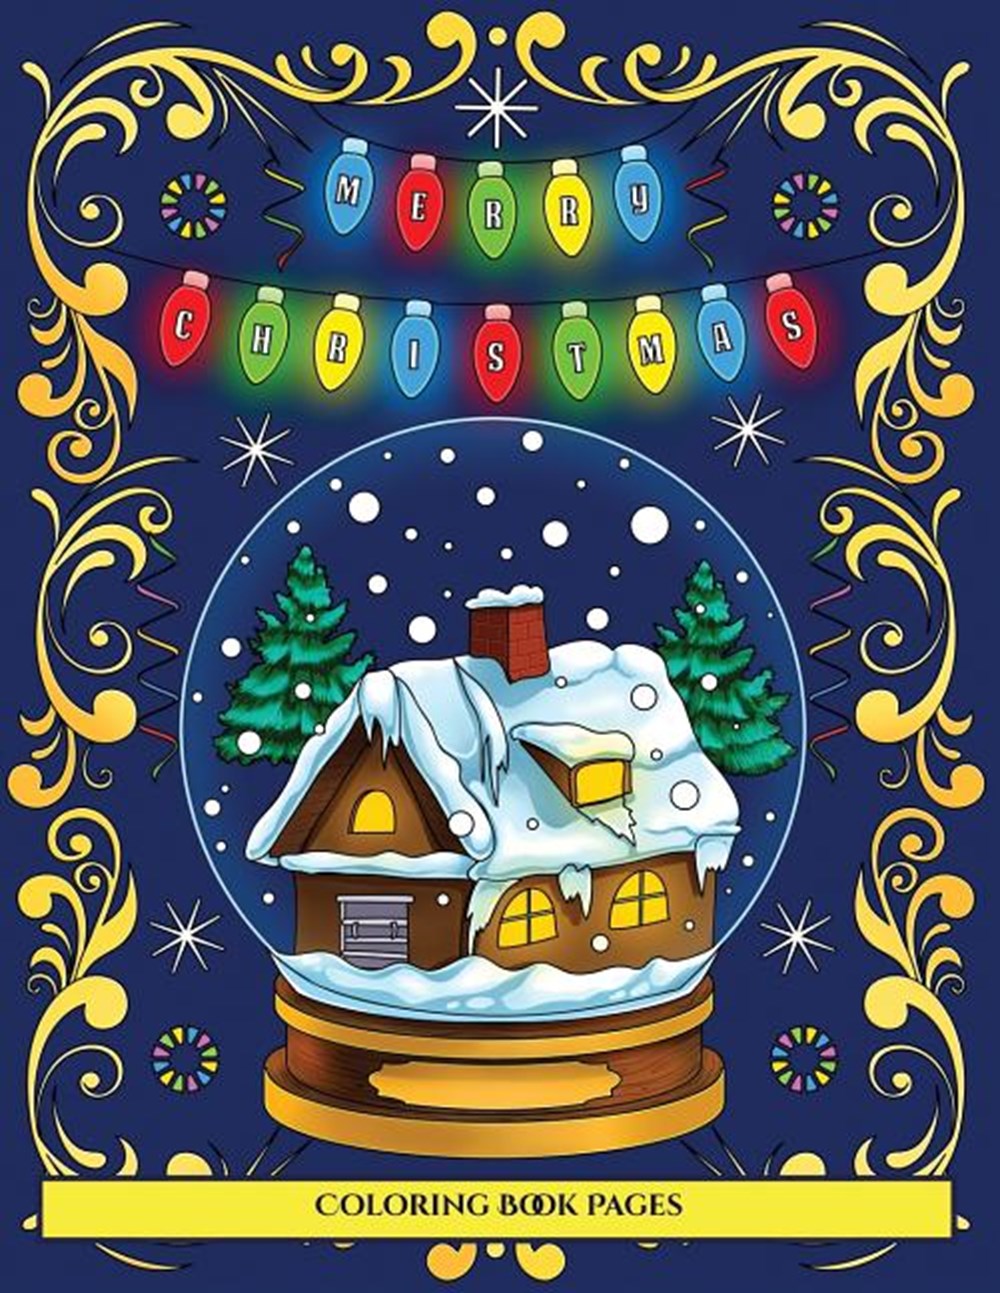 Coloring Book Pages (Merry Christmas): An adult coloring (colouring) book with 30 unique Christmas c